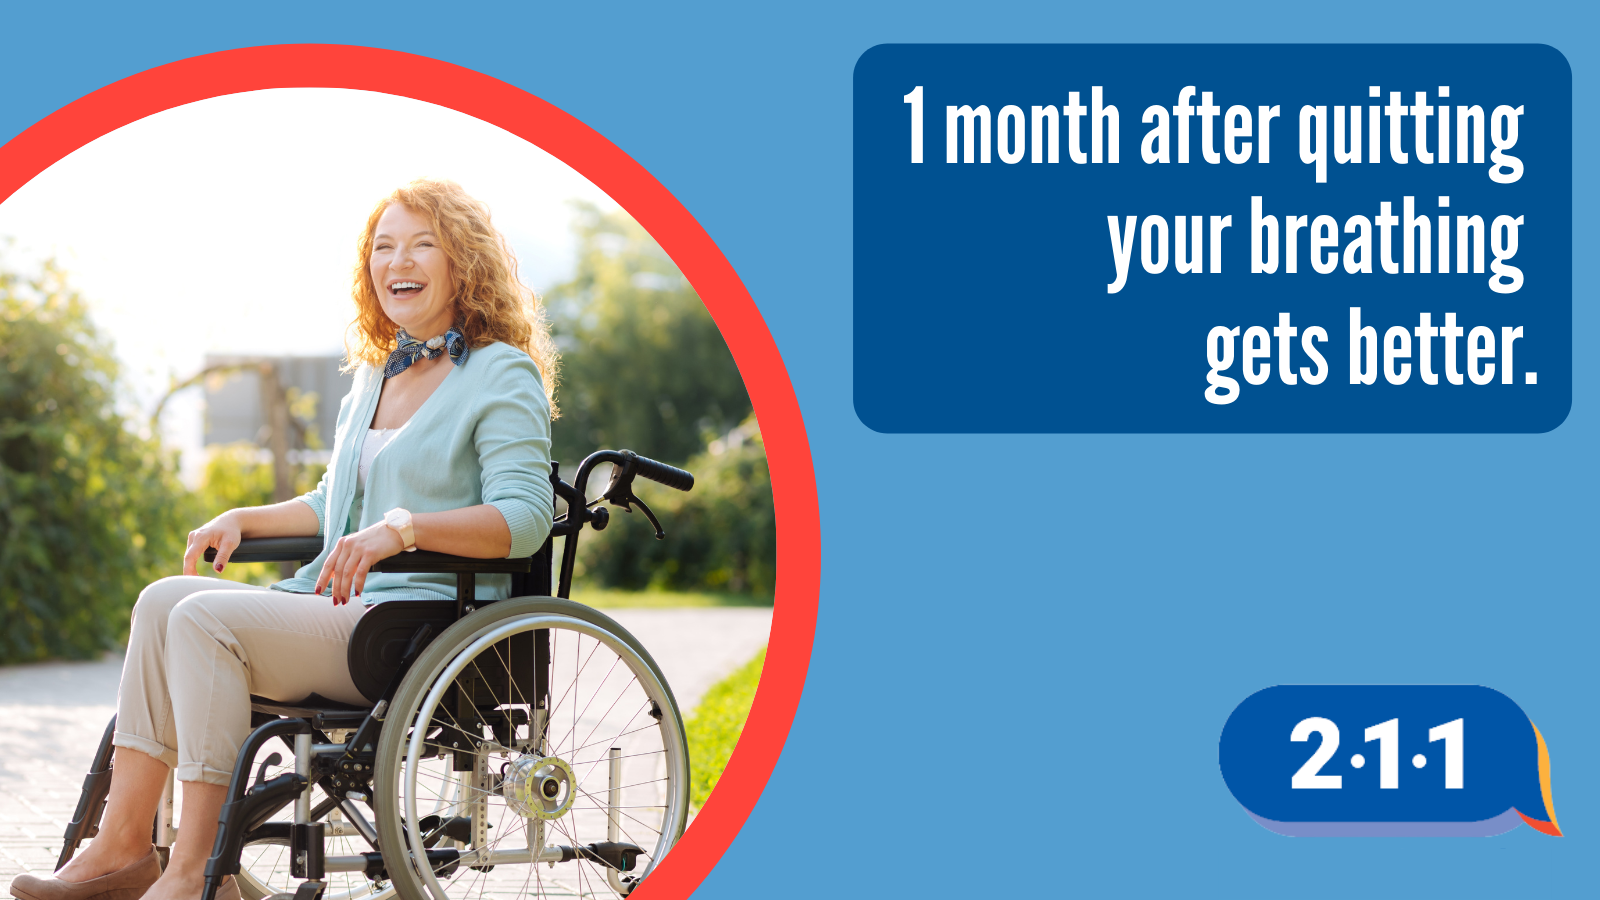 Image of person in wheelchair and text: 1 month after quitting your breathing gets better. 2-1-1